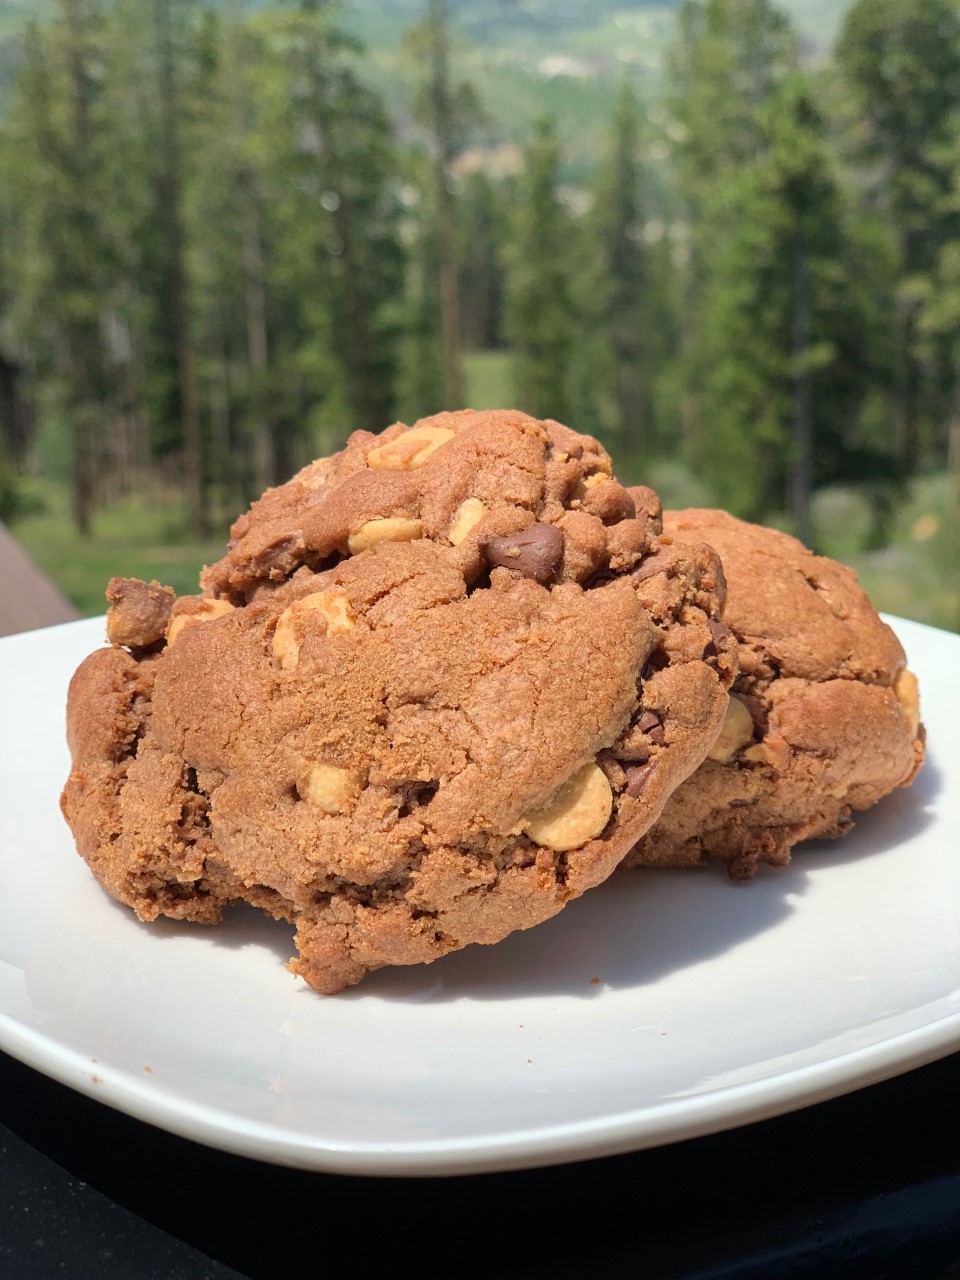 Mountainous Chocolate Peanut Butter Cup Cookies